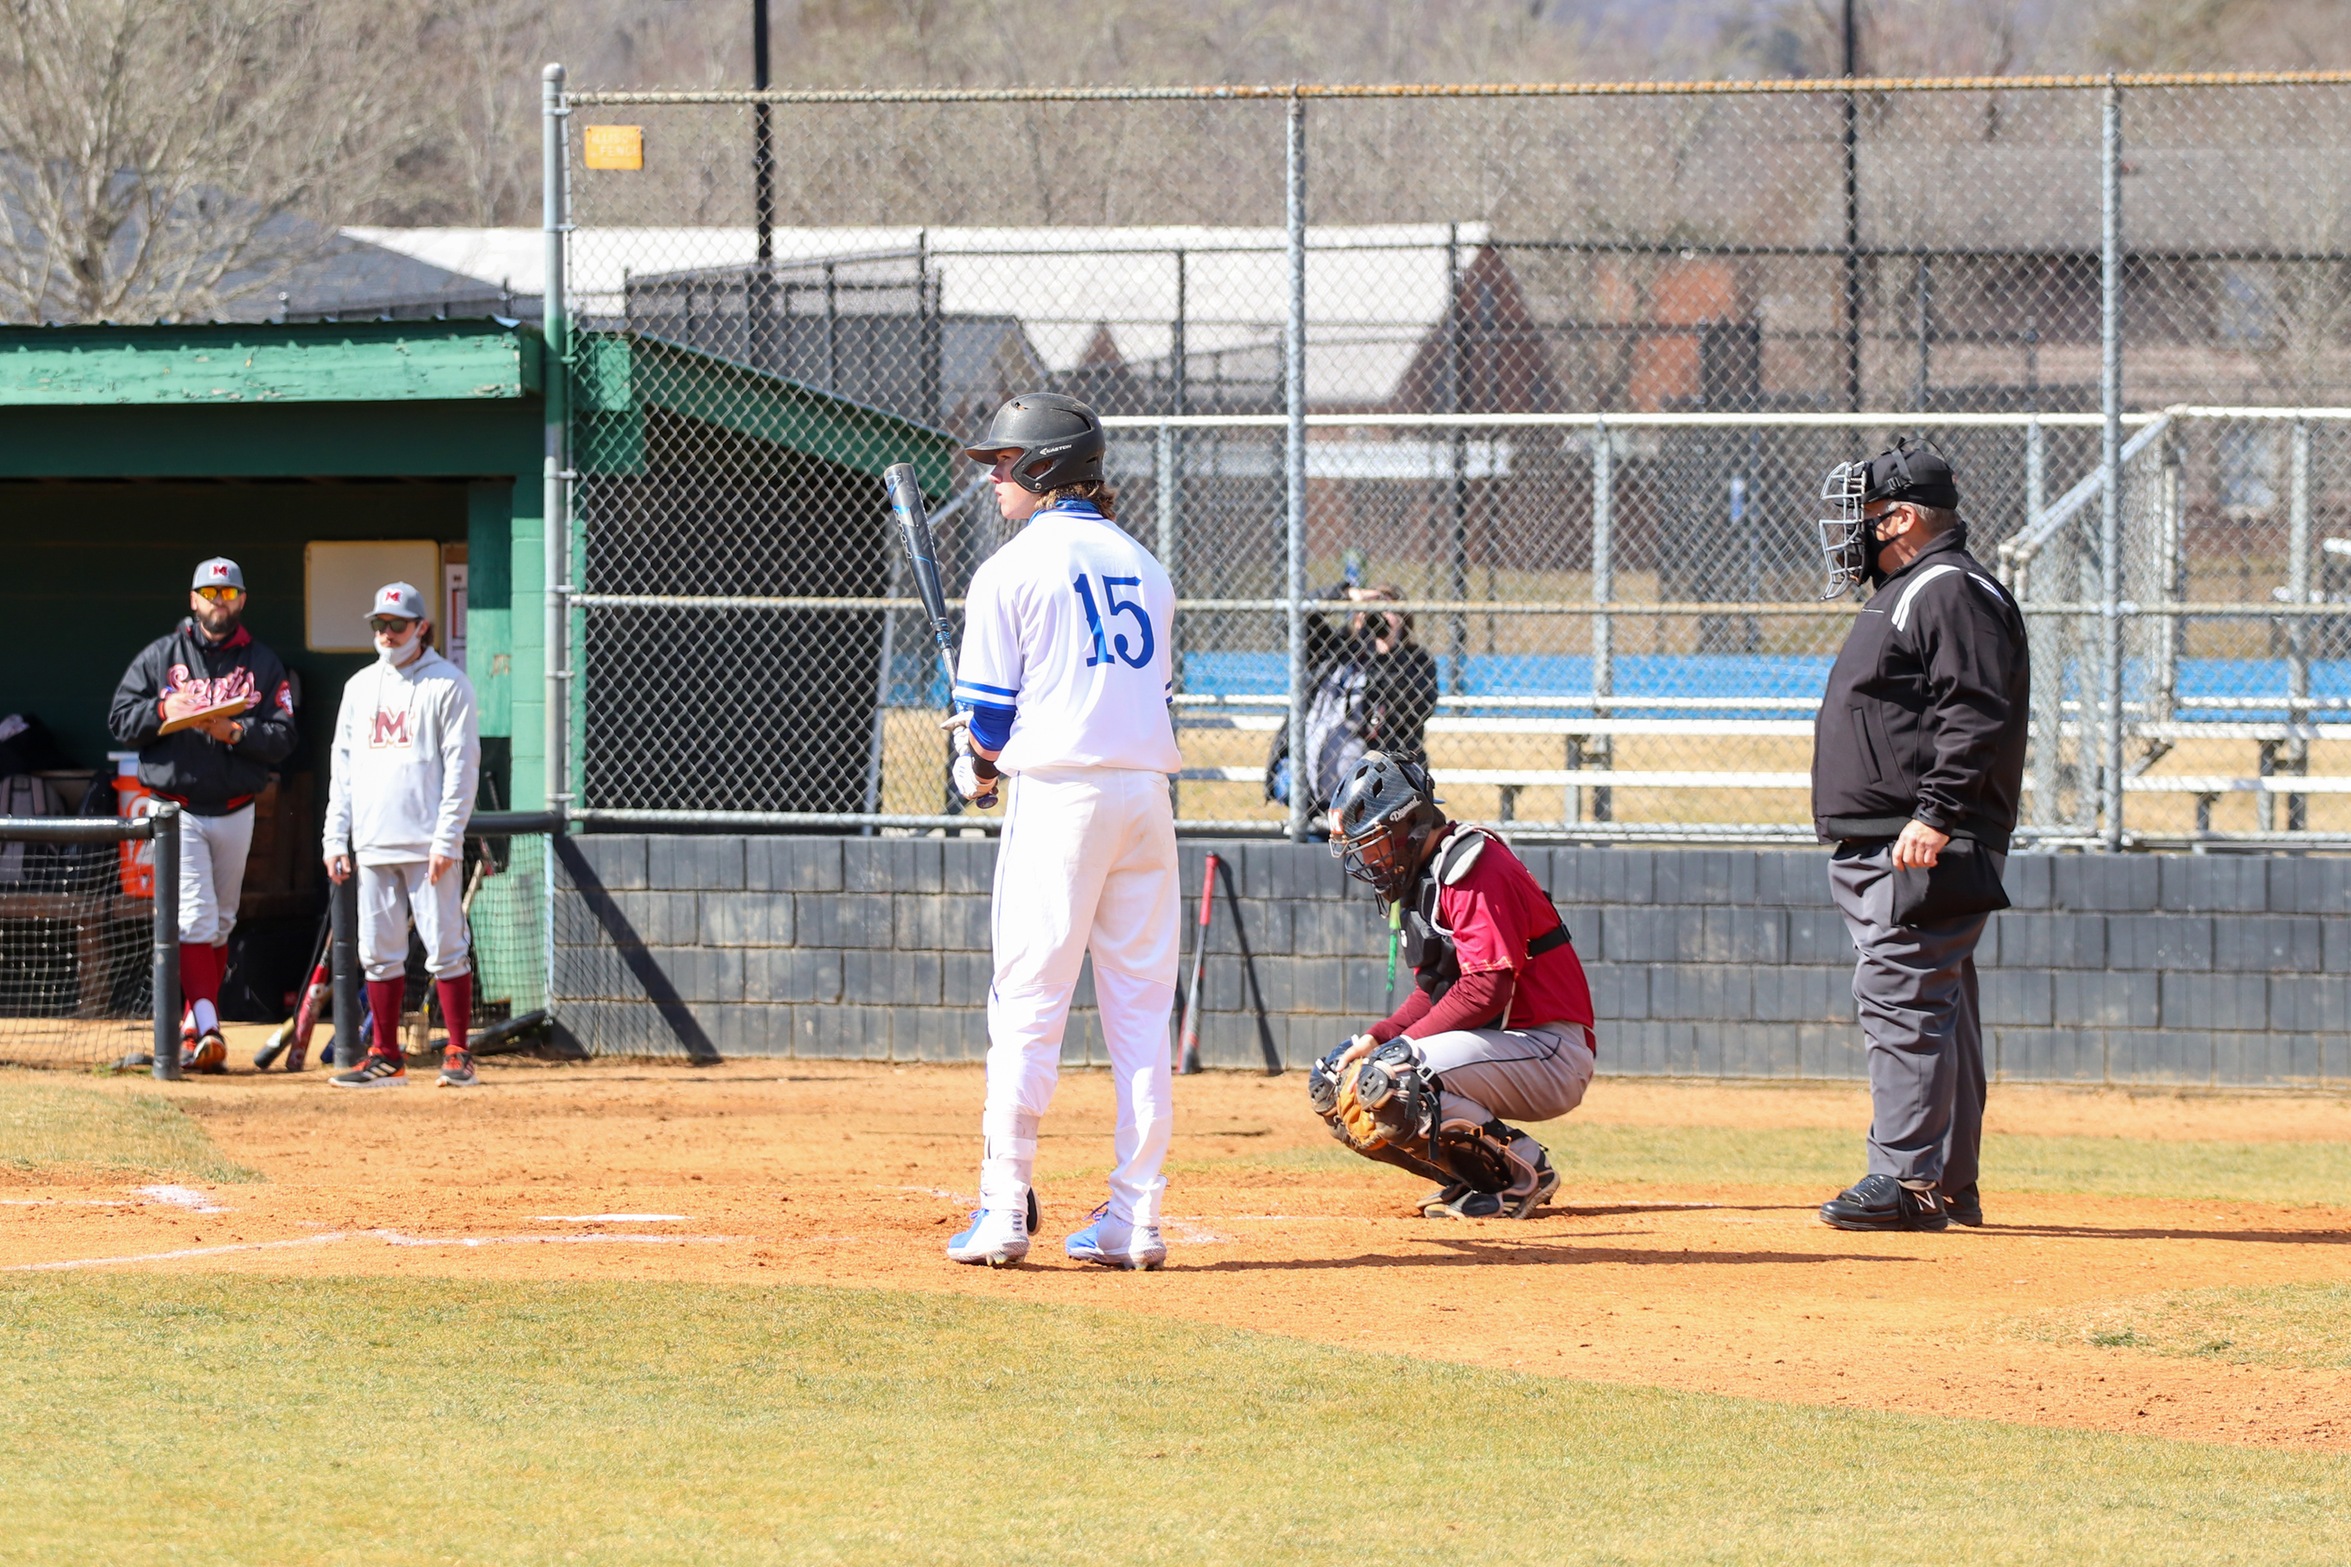 Freshman outfielder Logan Clark notched his first collegiate RBI and extra-base hit in Brevard's sweep-clinching victory over Averett on Sunday (Photo courtesy of Victoria Brayman '22).